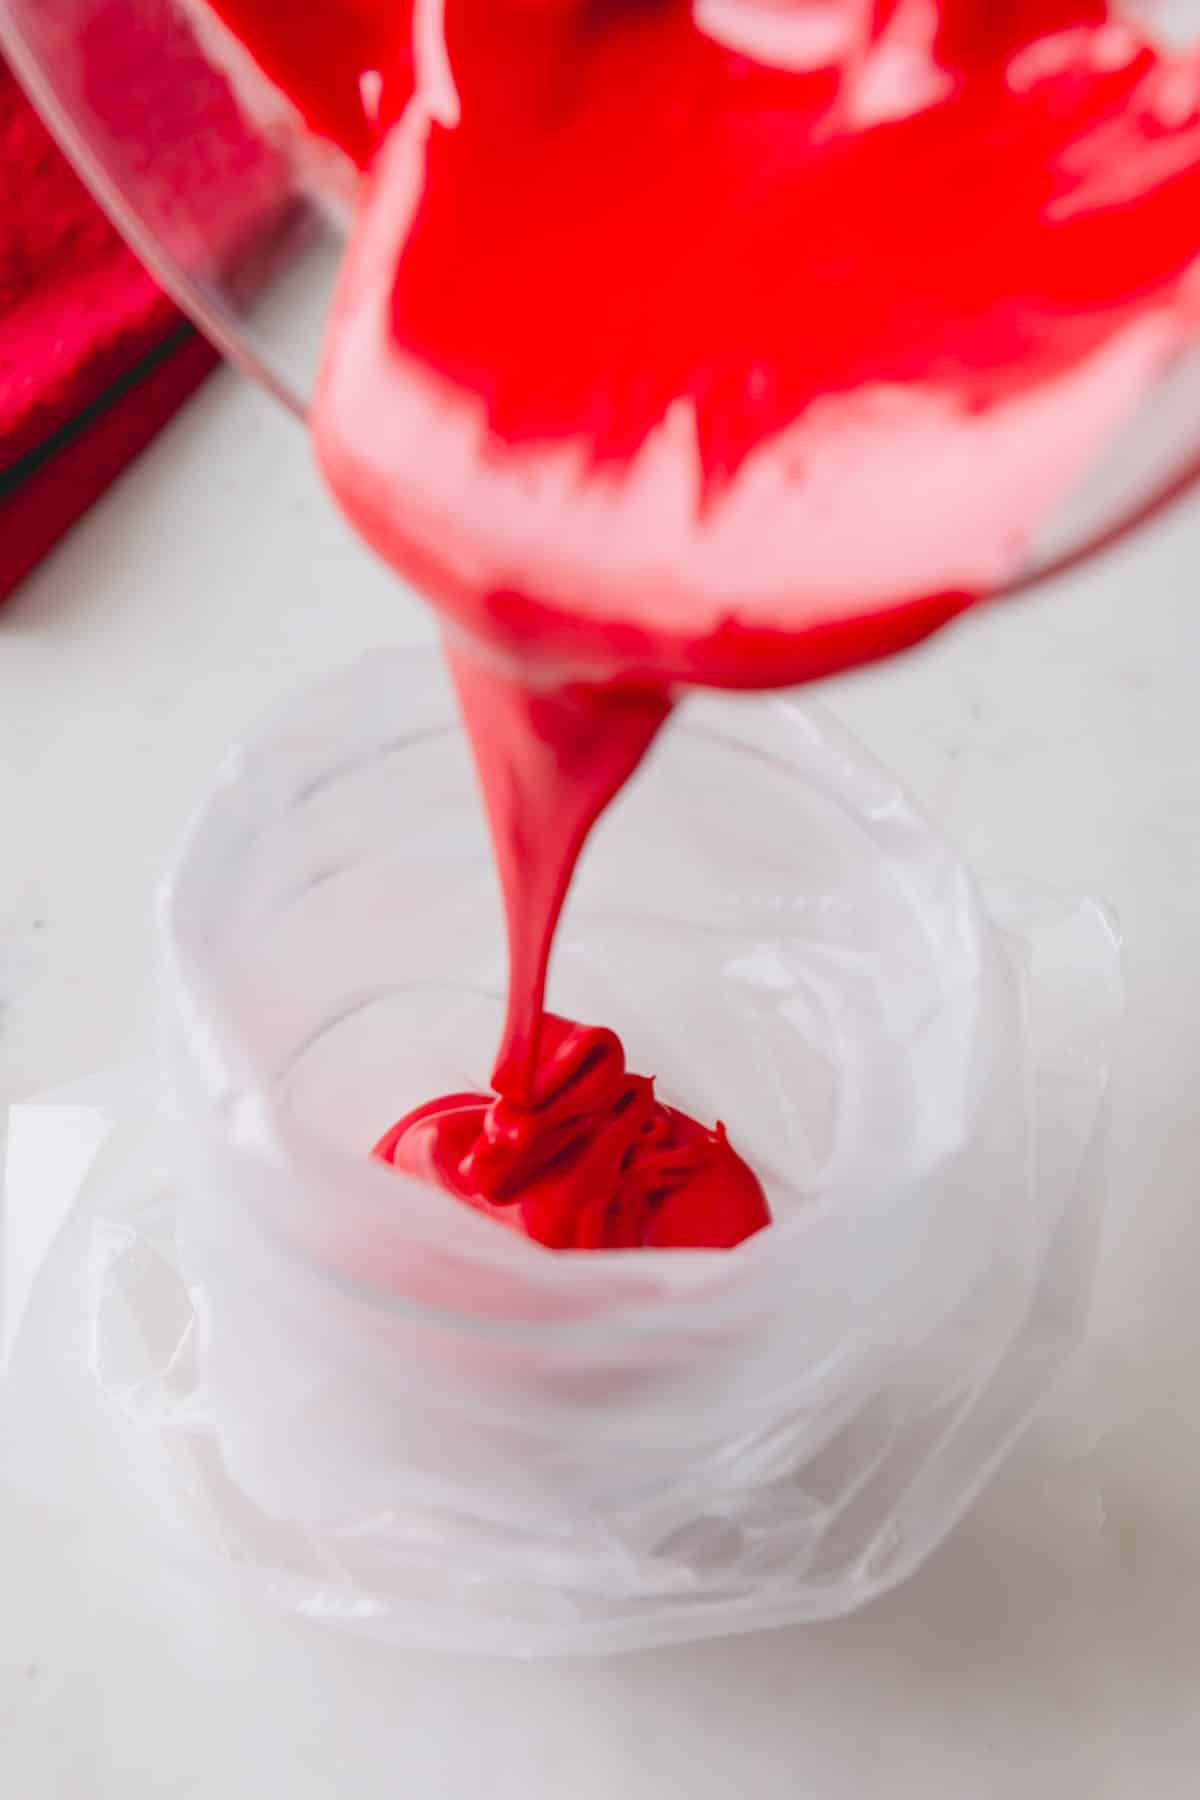 Red royal icing being poured into a piping bag.